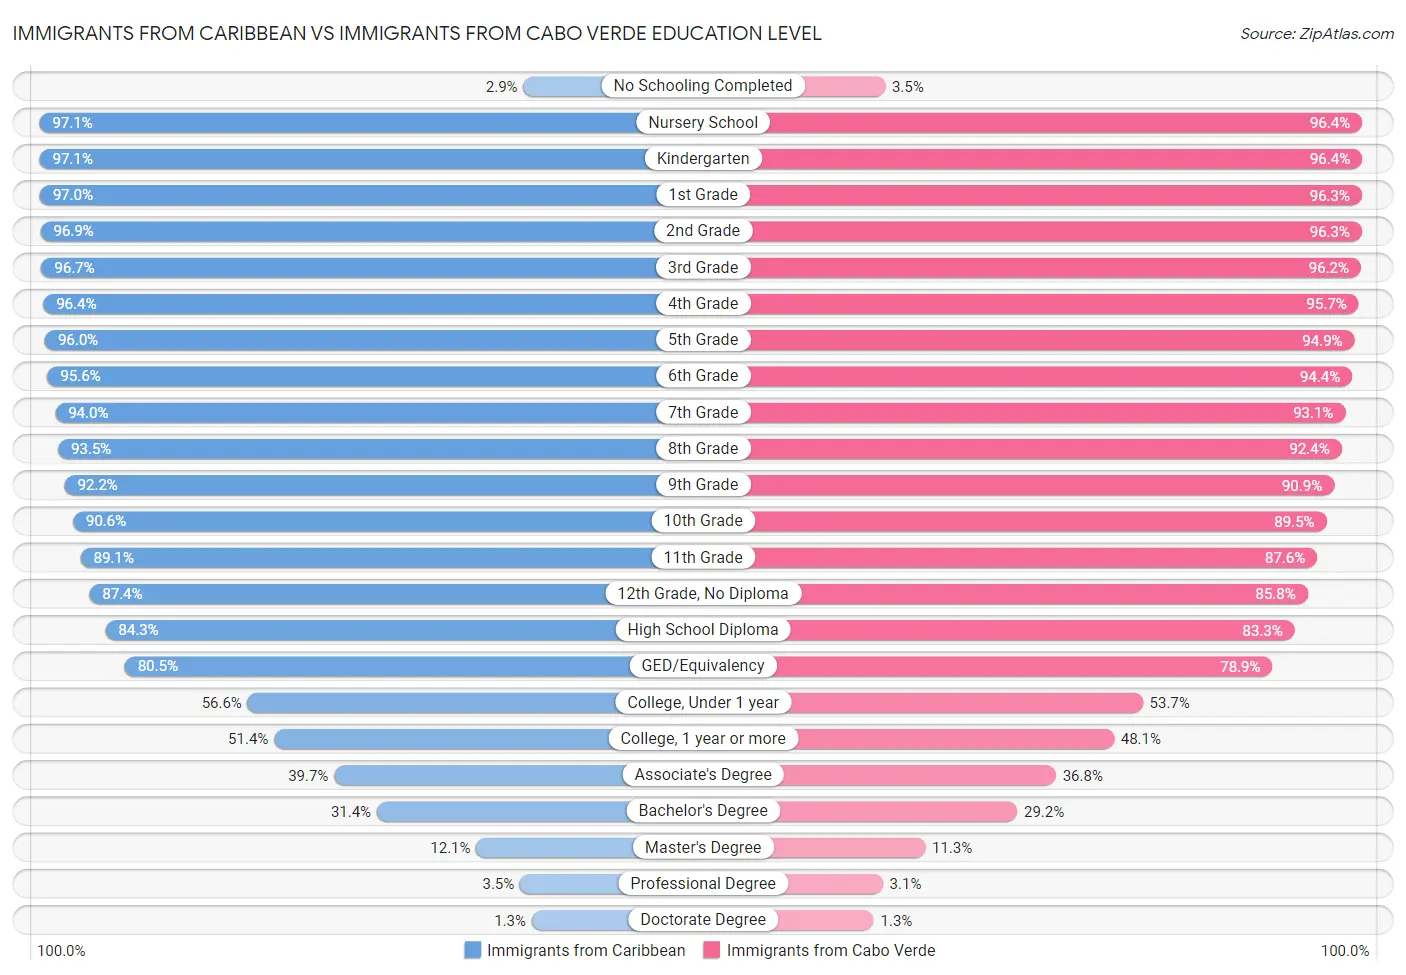 Immigrants from Caribbean vs Immigrants from Cabo Verde Education Level